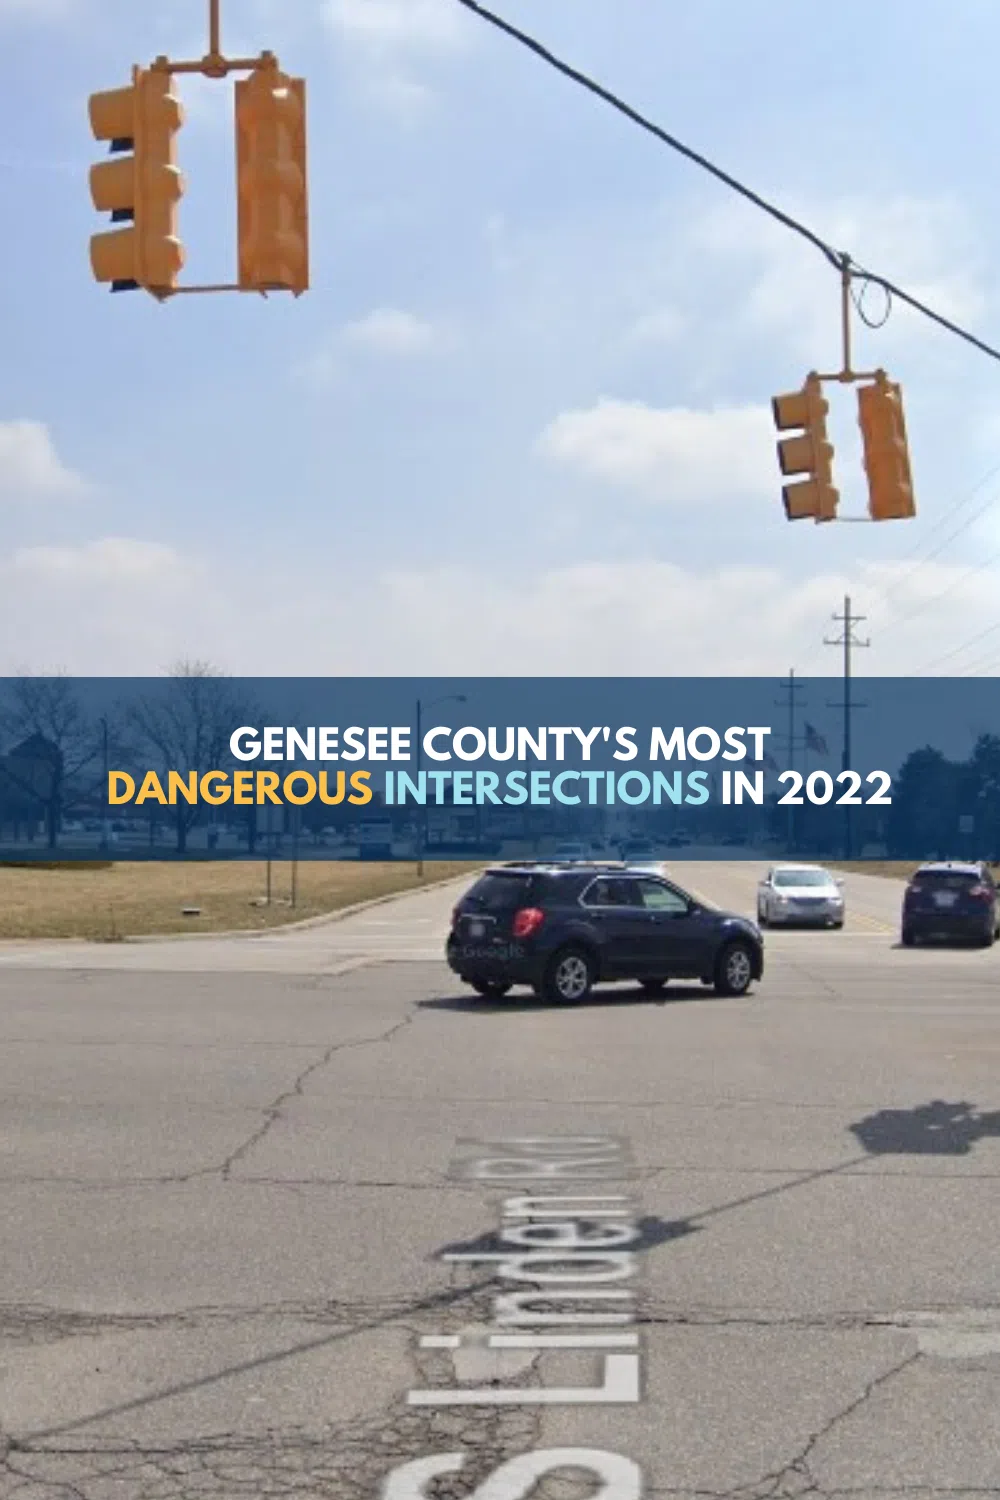 Genesee County’s Most Dangerous Intersections in 2022